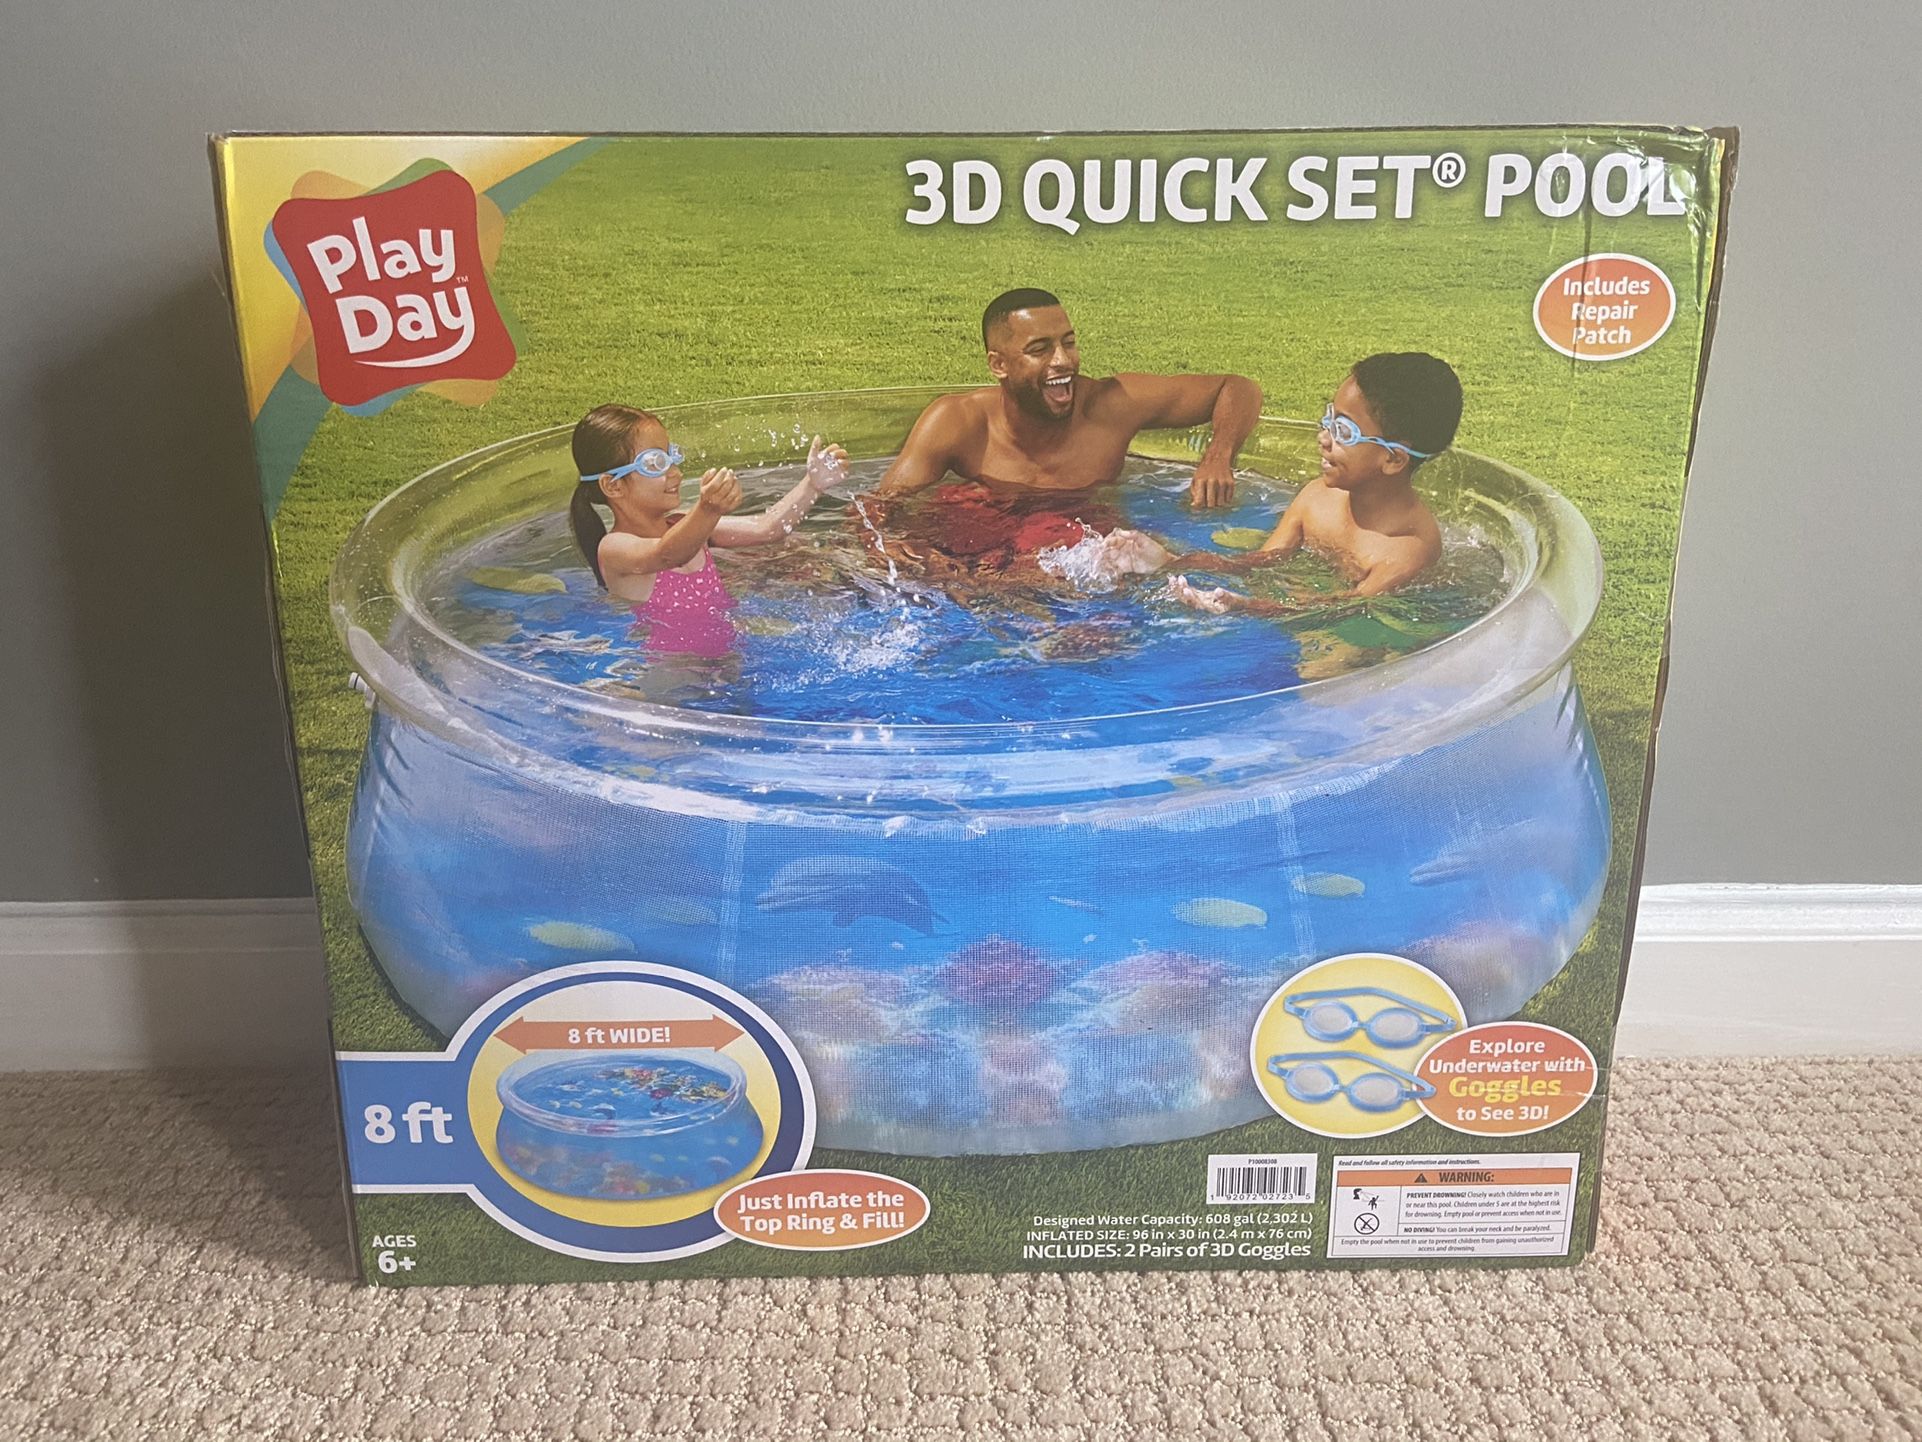 Play Day 3D Quick Set Pool w/ 2 swimming goggles - Brand New